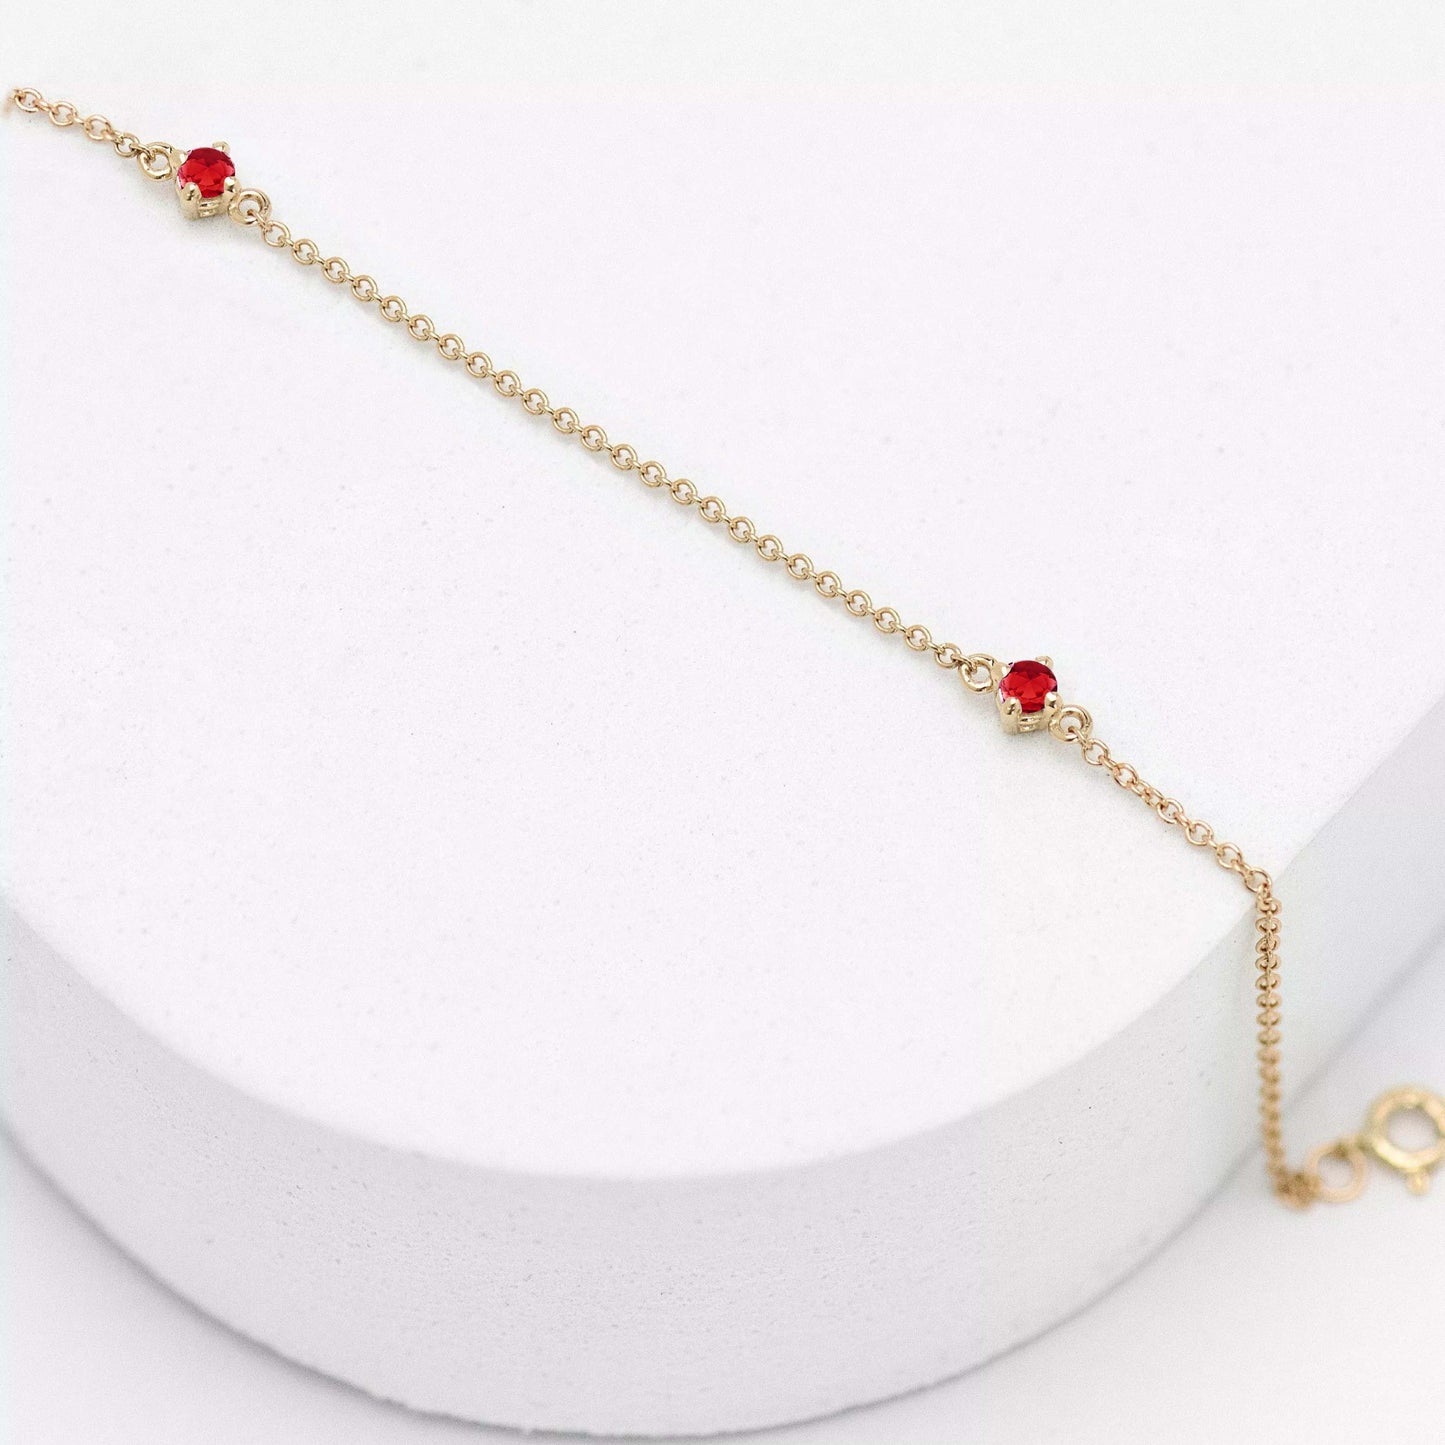 Personalized Station Bracelet with Ruby